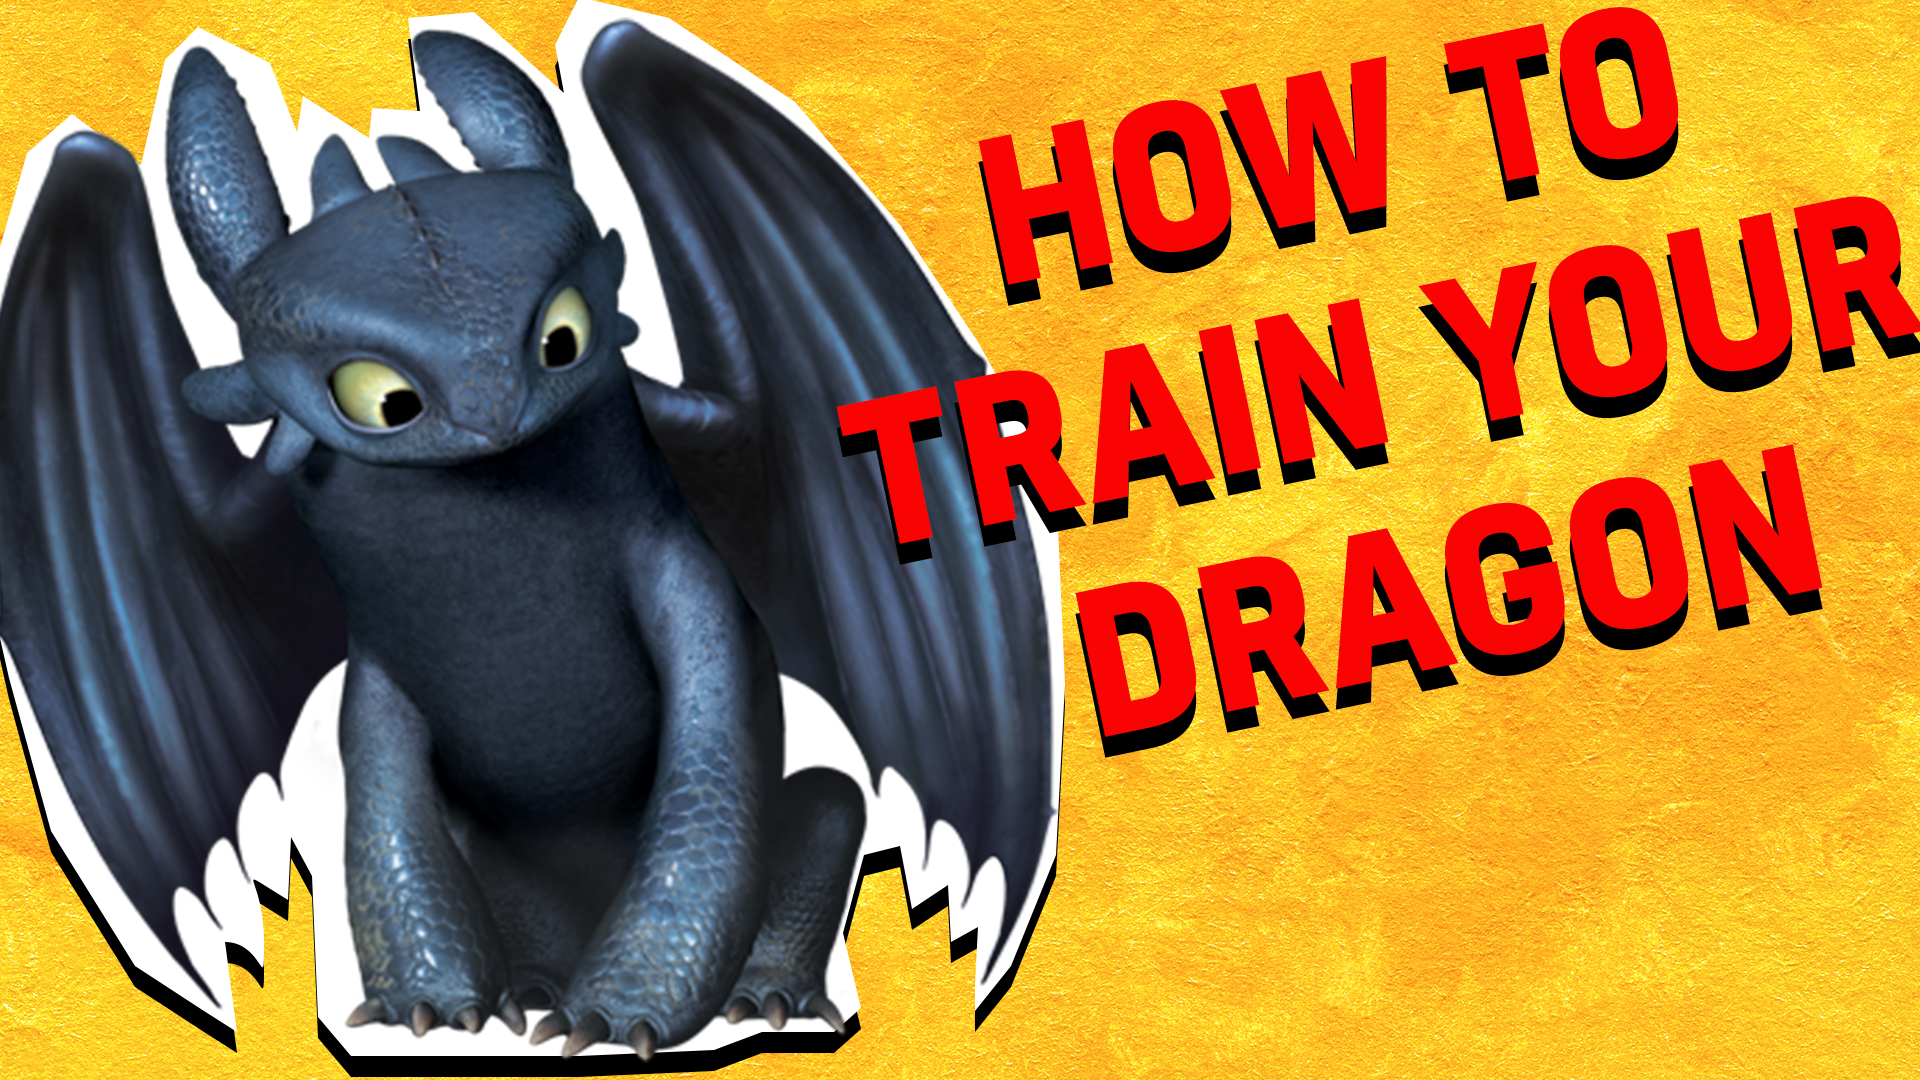 How to train your dragon result